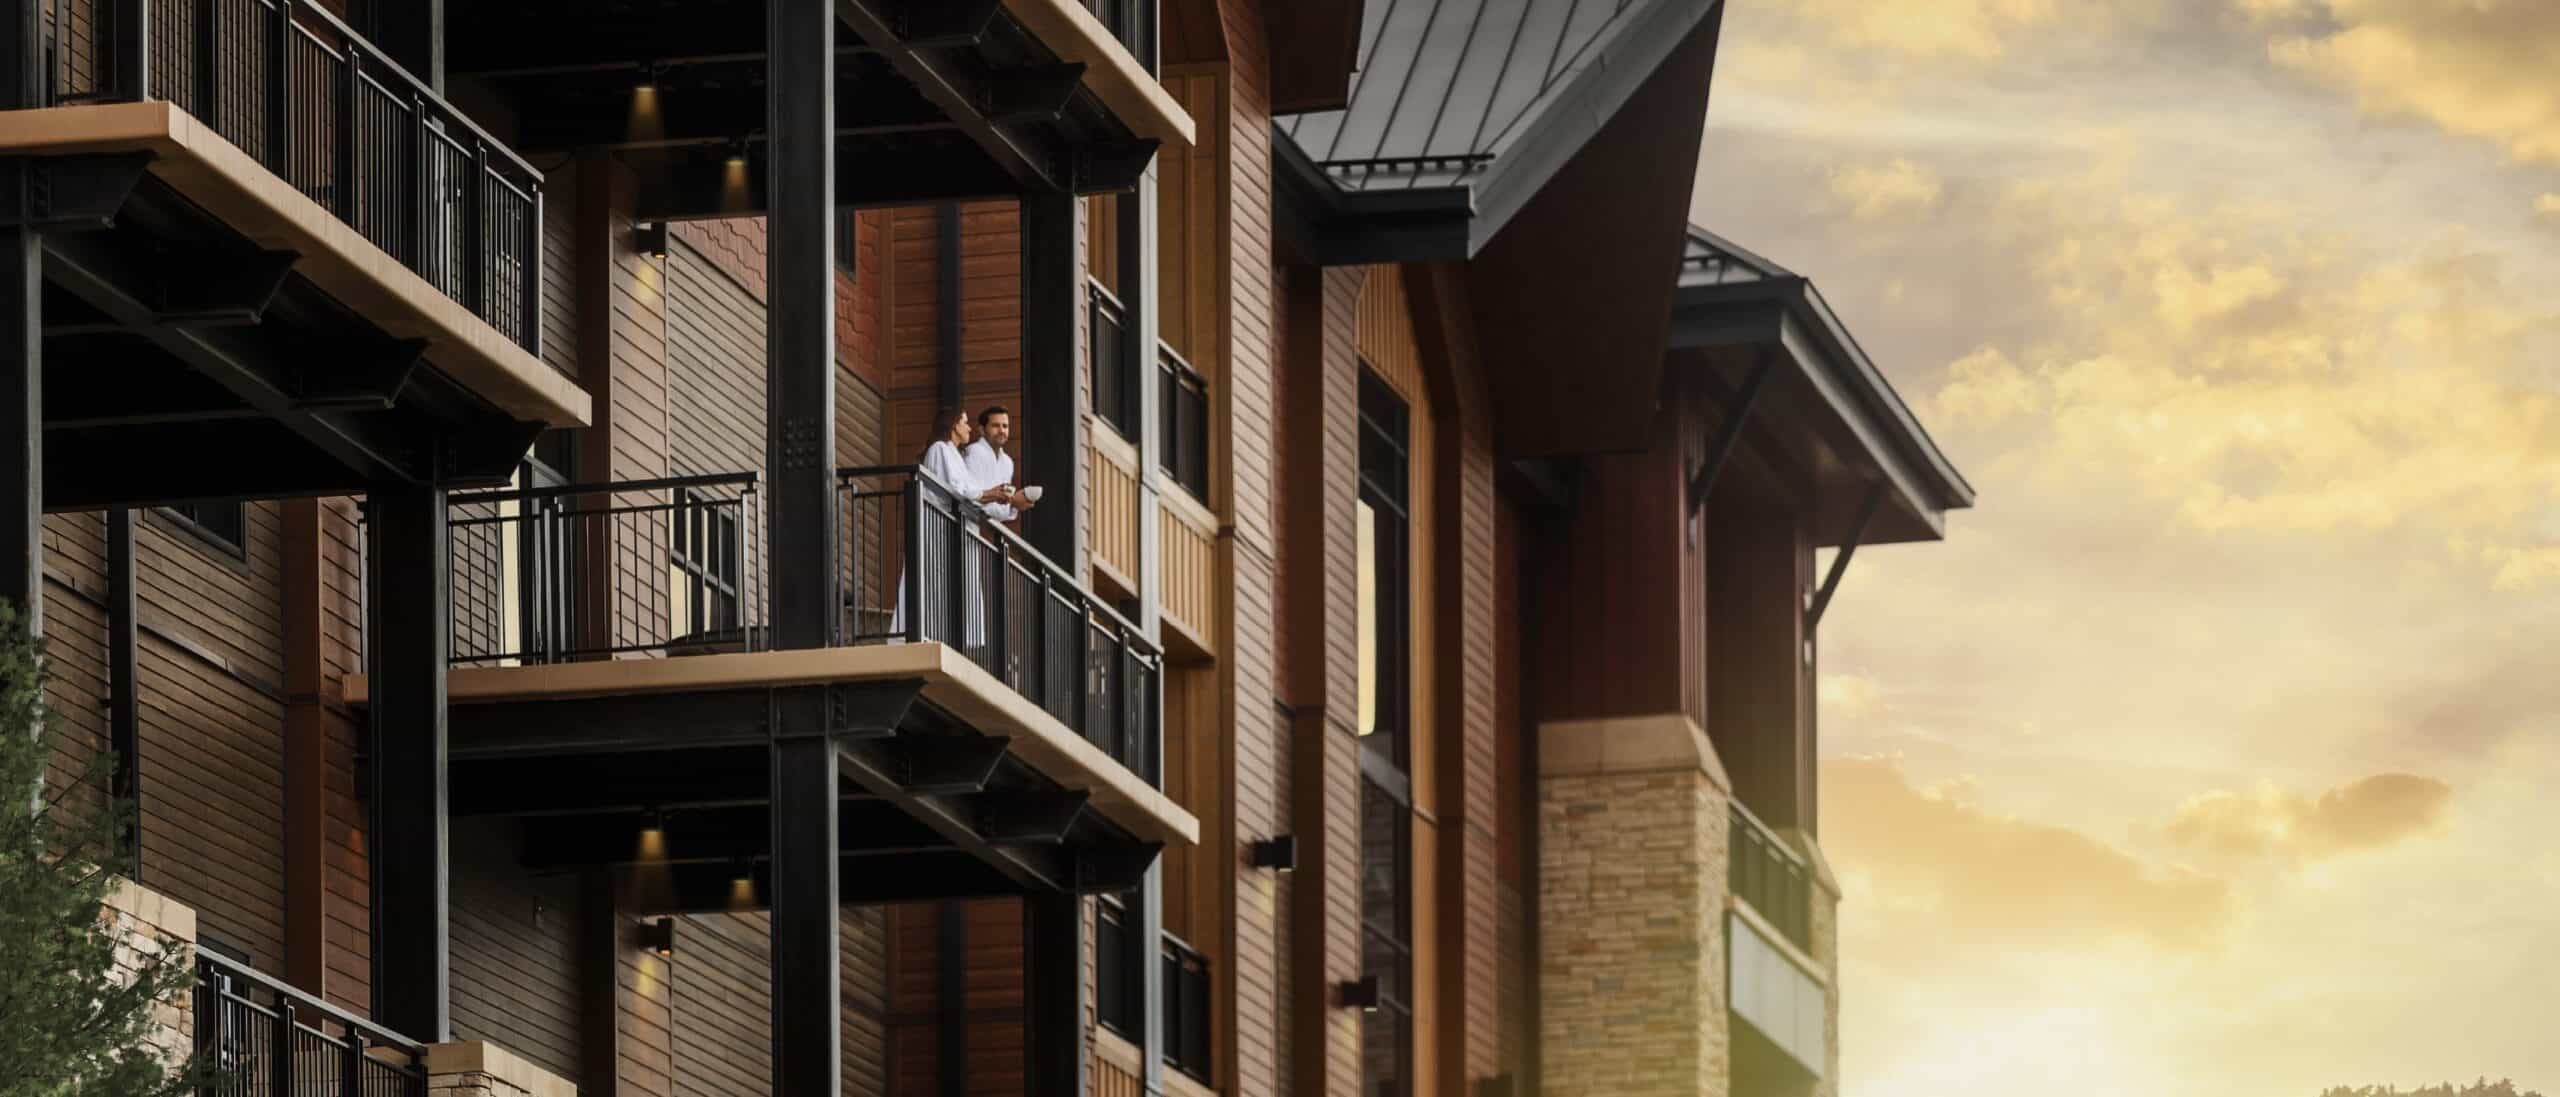 a man and woman stand on a balcony in white bathrobes during golden hour.